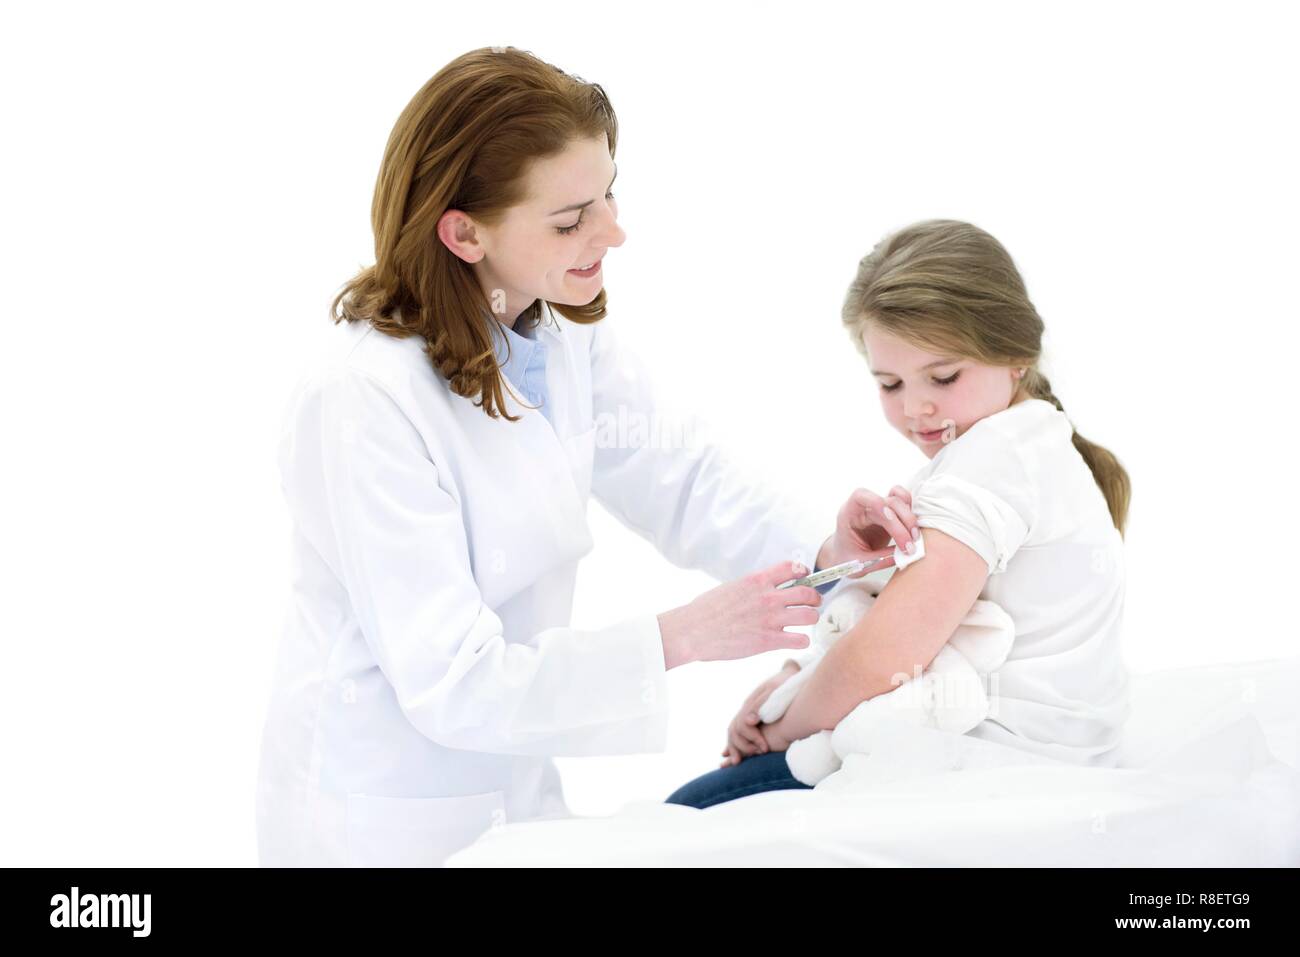 Female doctor injecting young girl in arm. Stock Photo